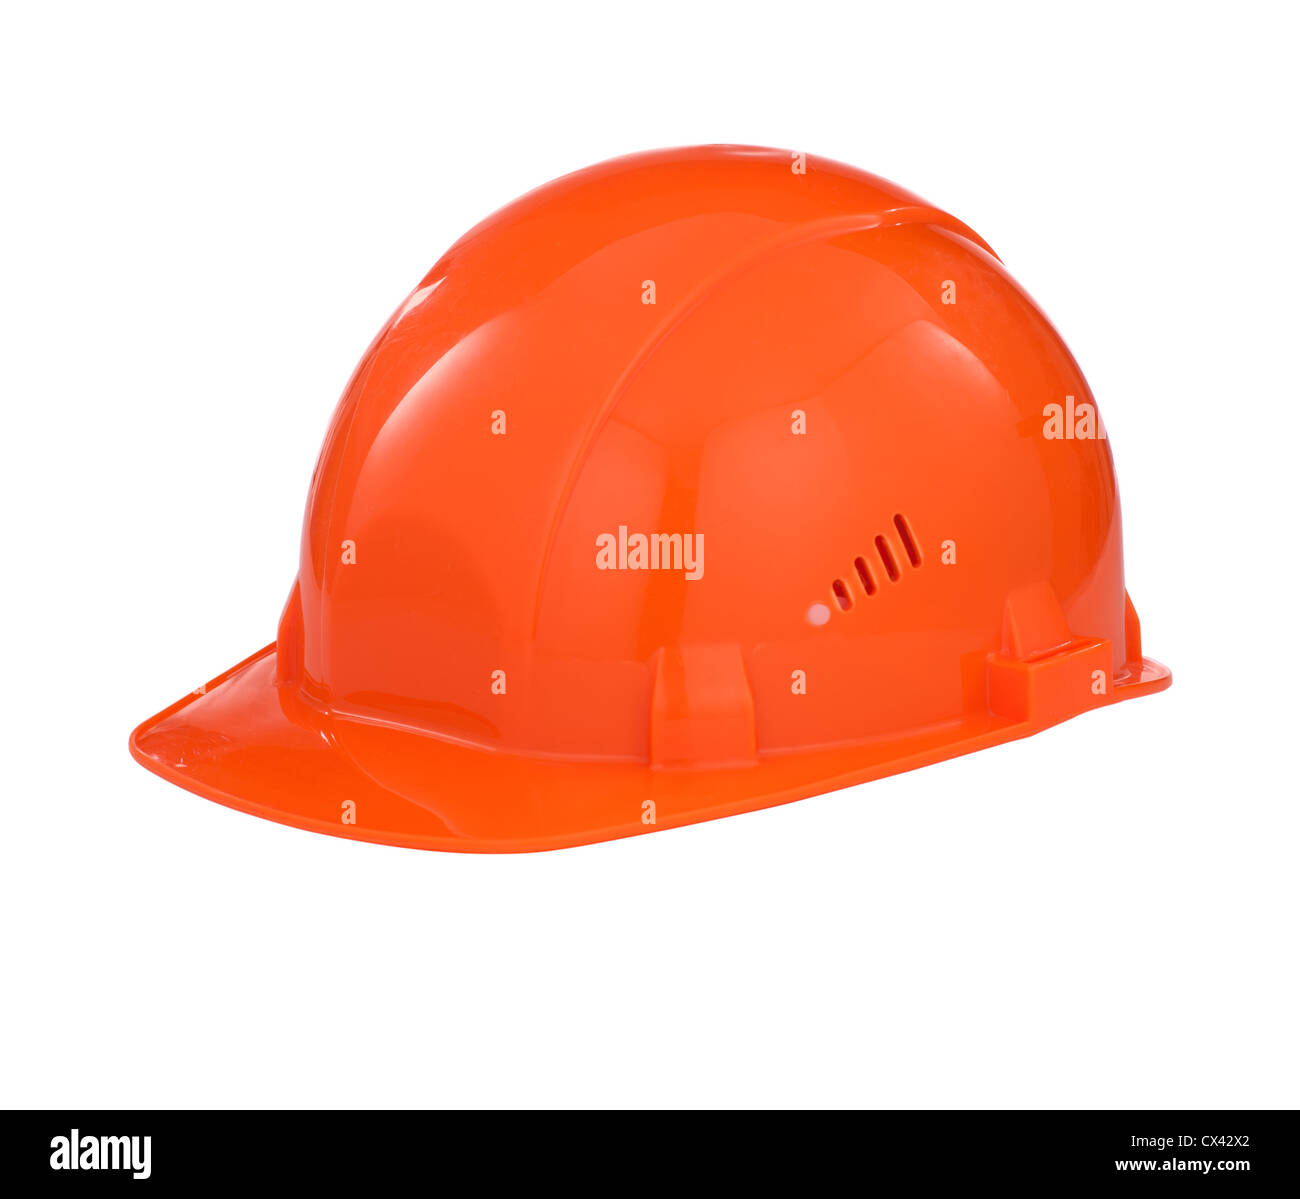 Orange builder safety hard hat with clipping path included Stock Photo